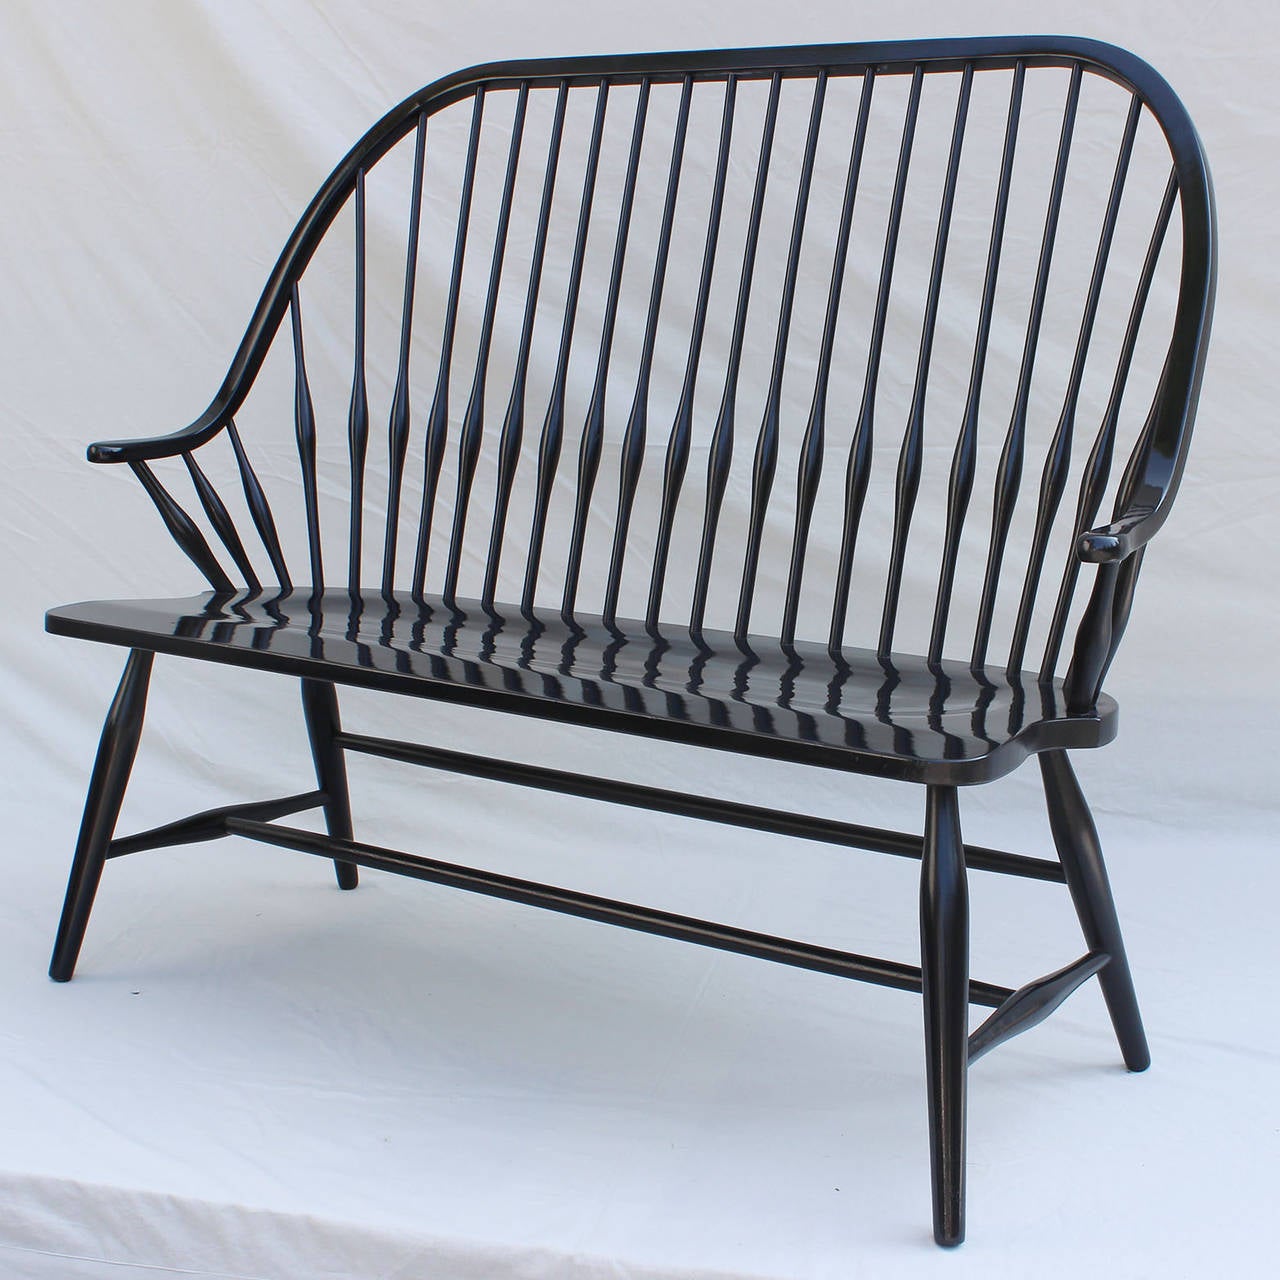 A Windsor style, high-back, black lacquered bench.

Complimentary shipping within Hamptons.